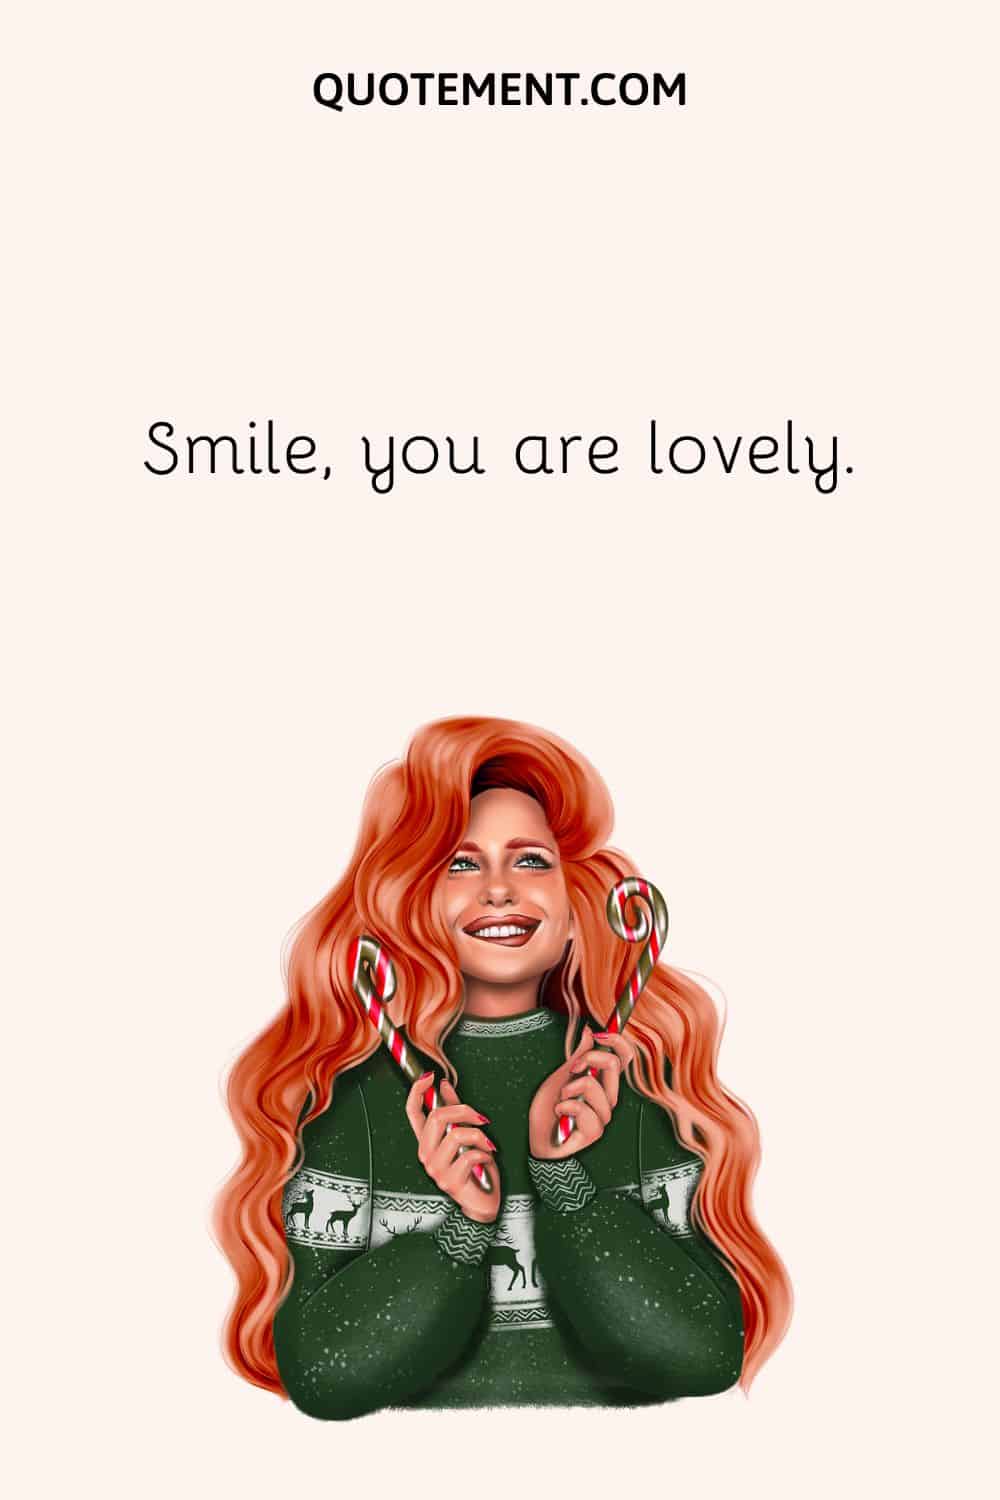 Smile, you are lovely